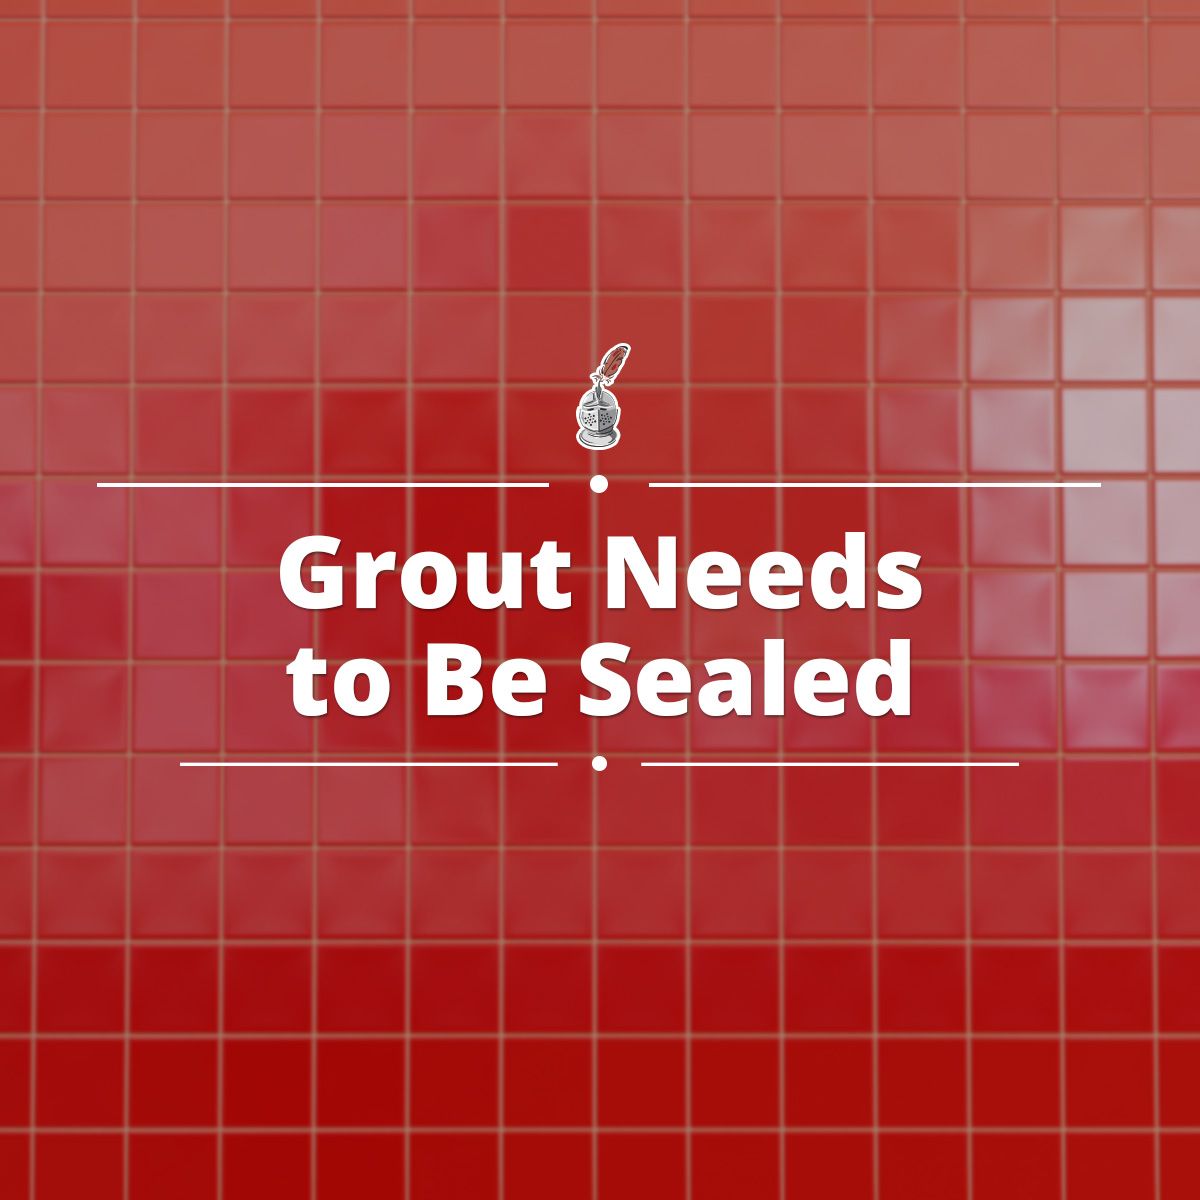 Grout Needs to Be Sealed